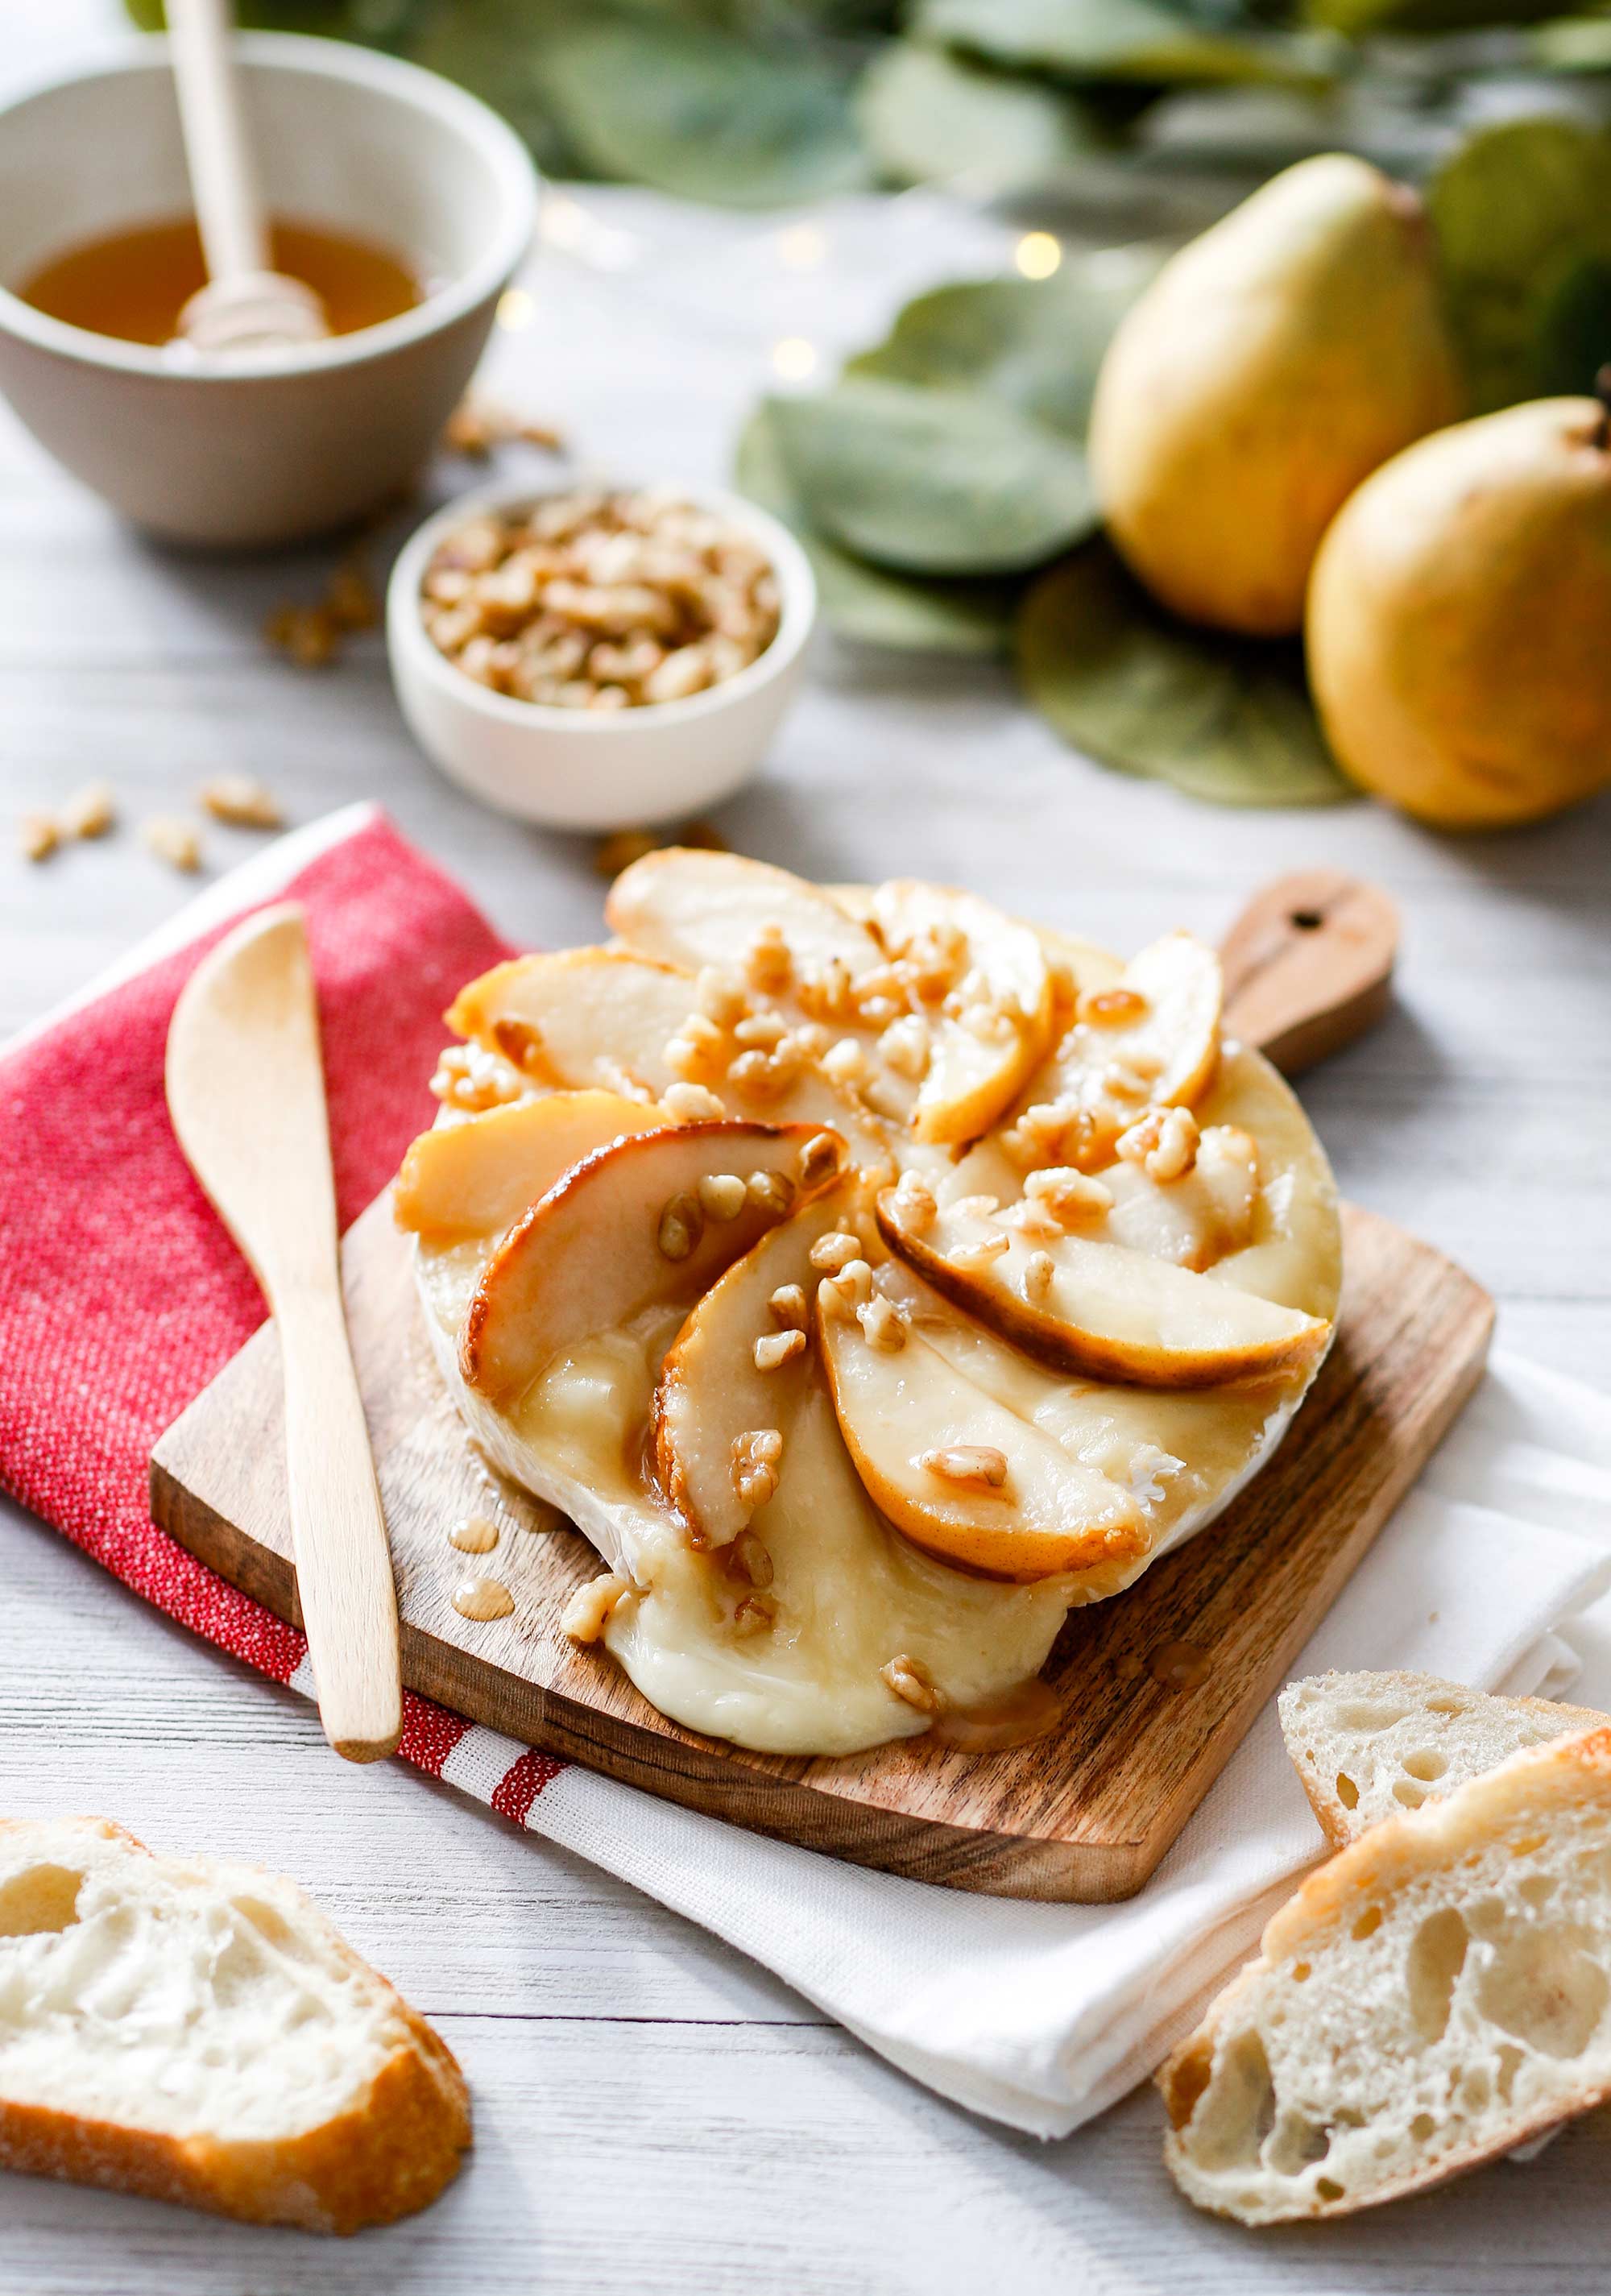 Caramelized Pear and Walnut Topped Brie with Honey